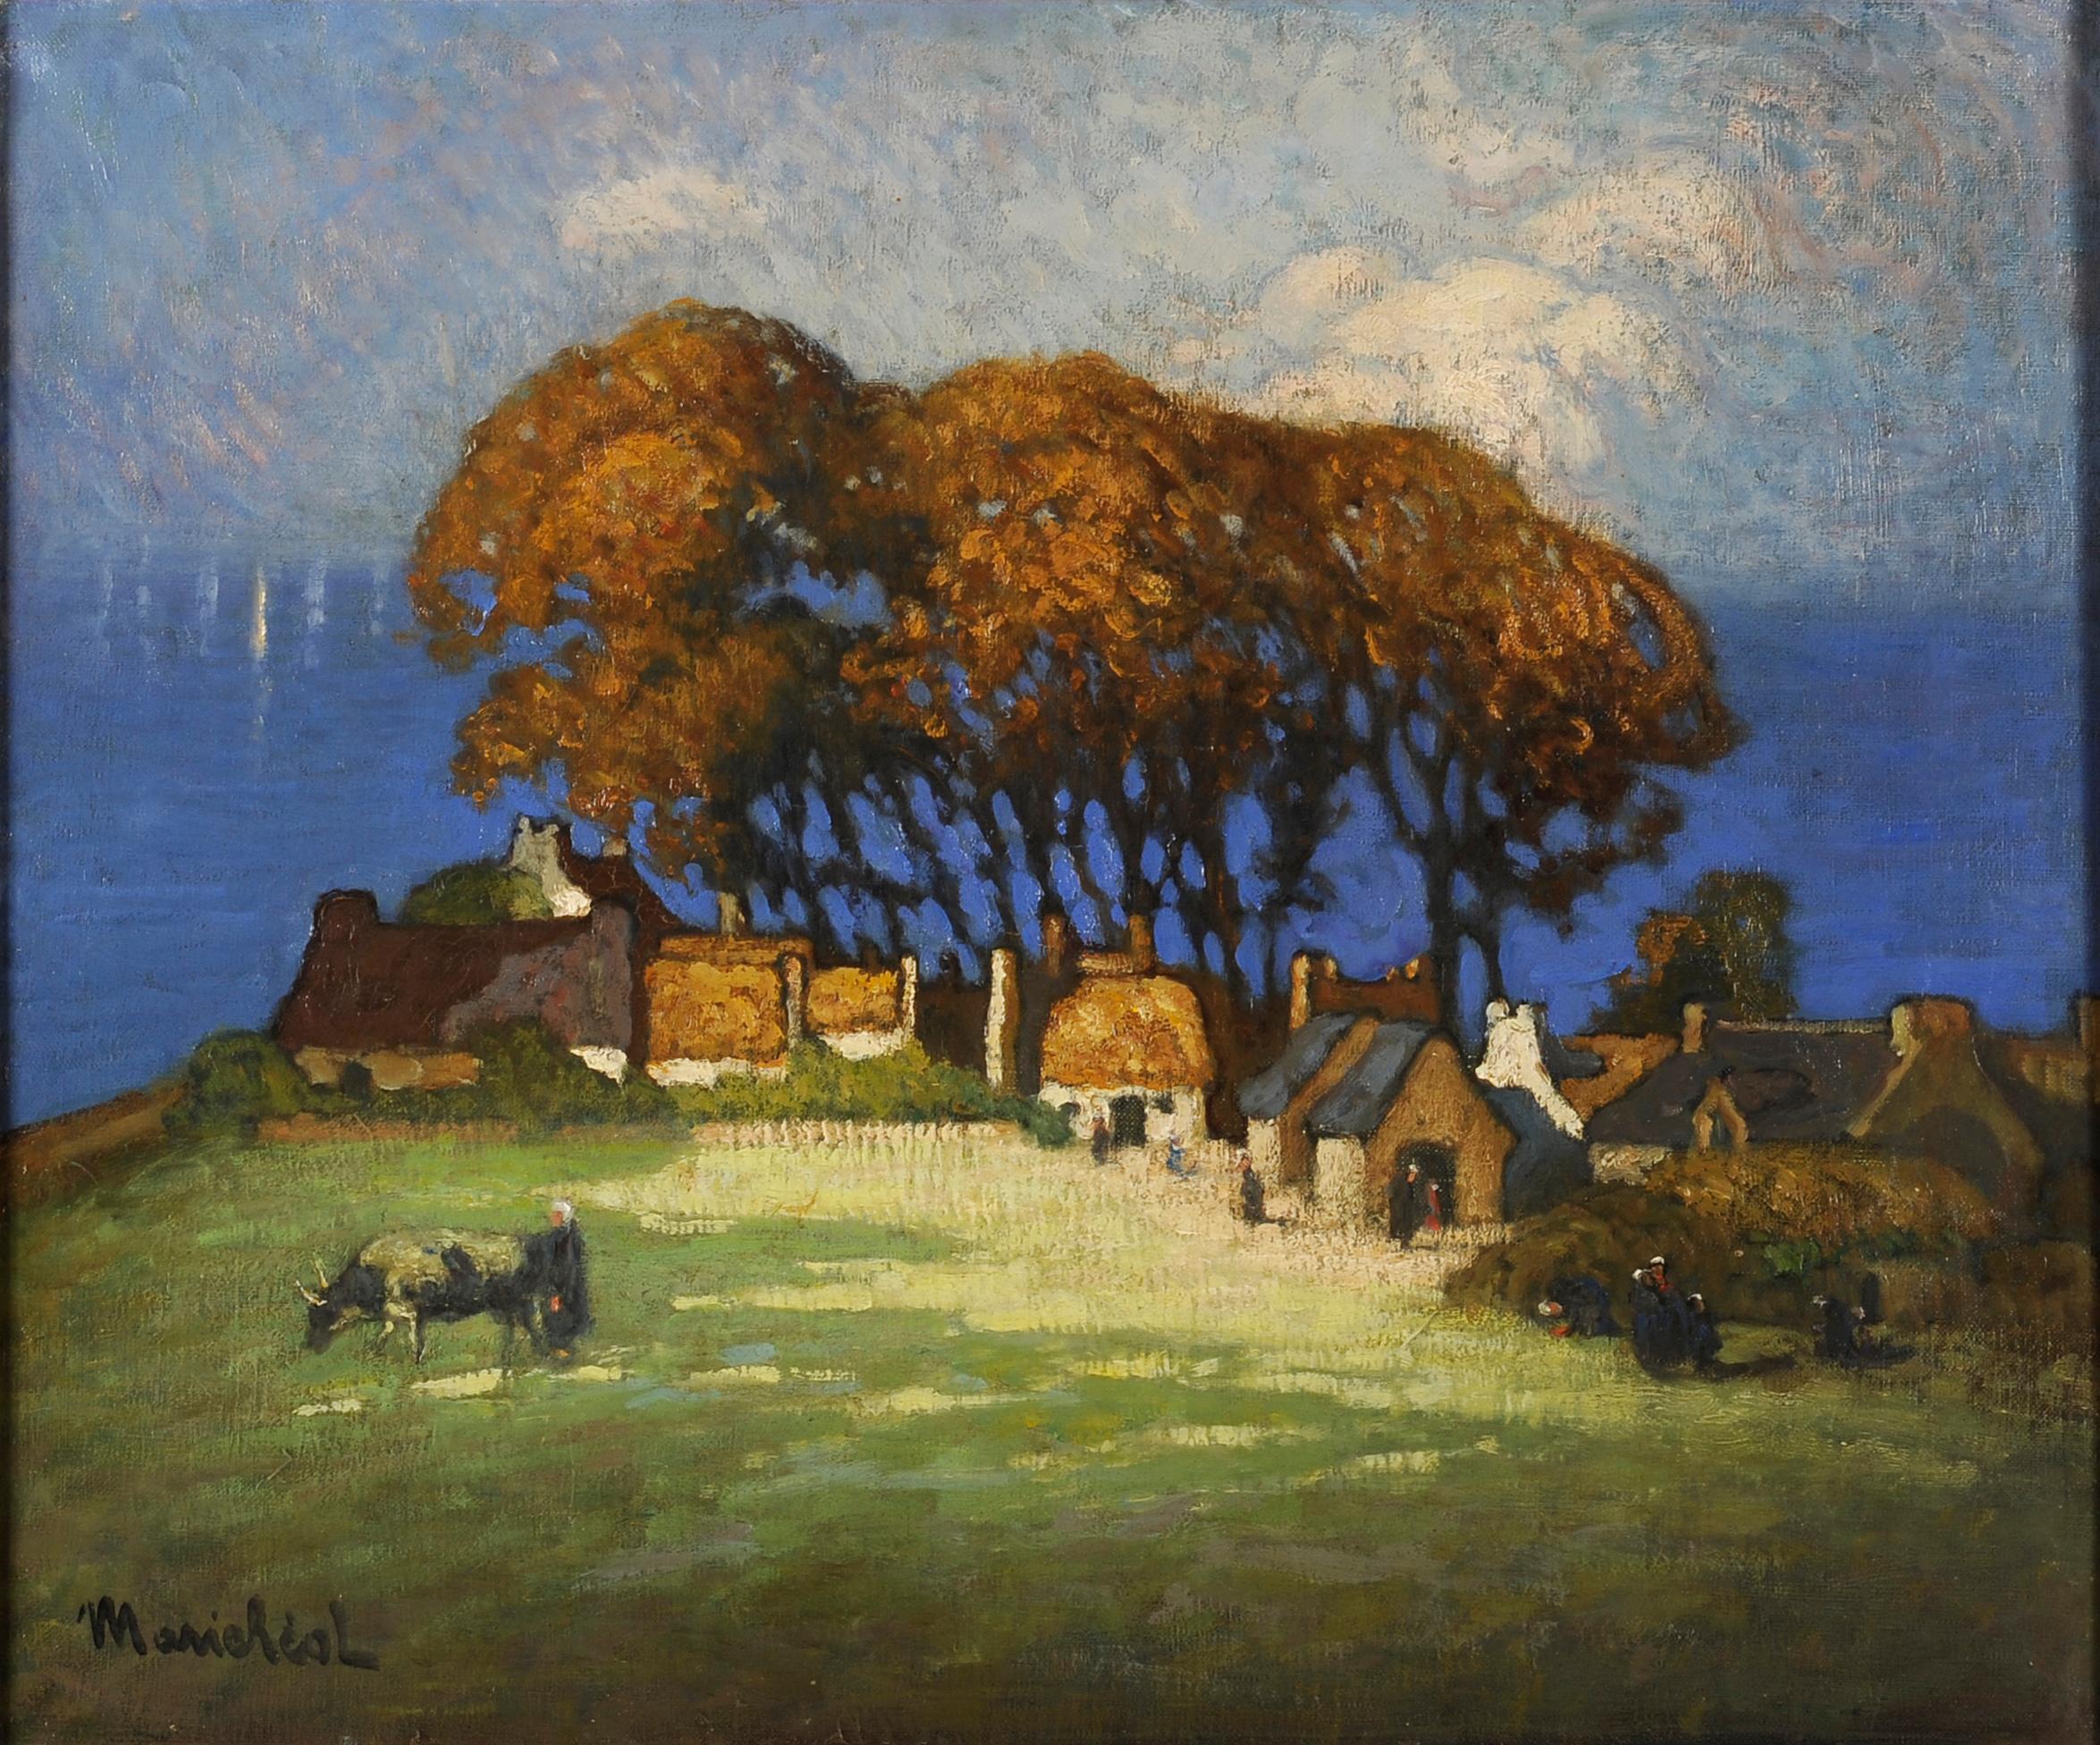 Landscape from Brittany near Douarnenez - Painting by Marie Réol